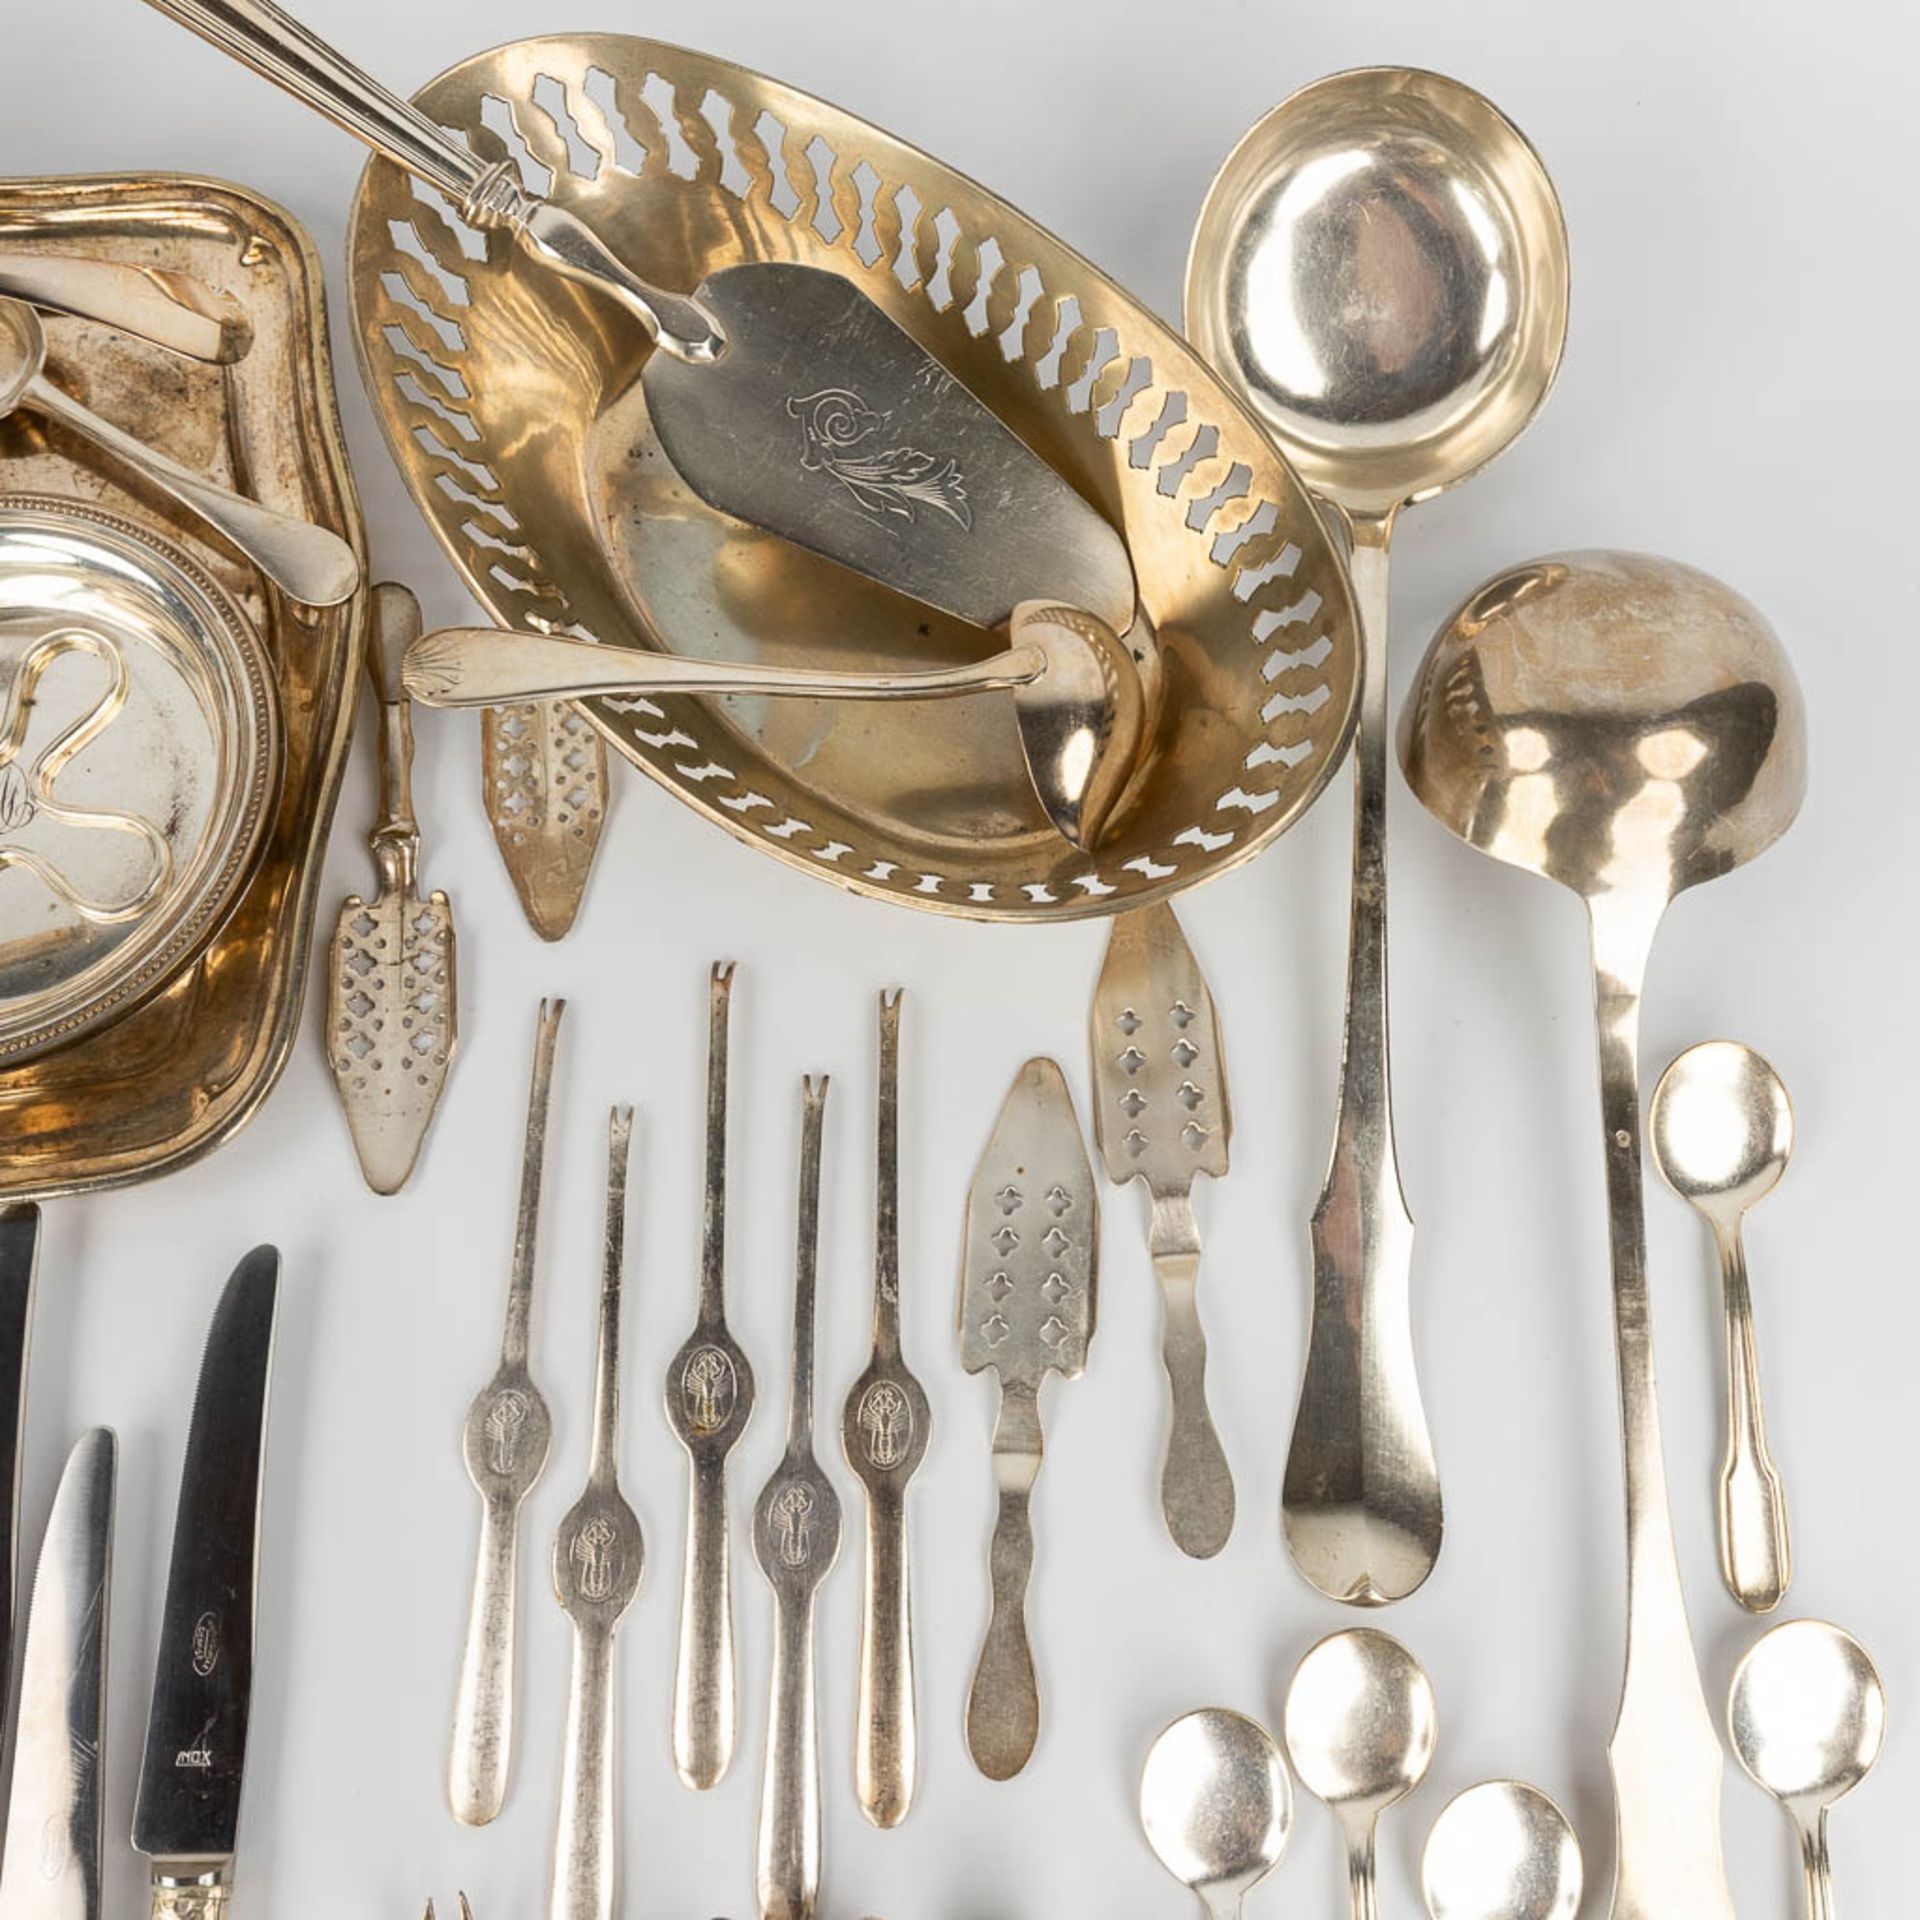 A large collection of cutlery and table accessories made of silver-plated metal. - Image 3 of 12